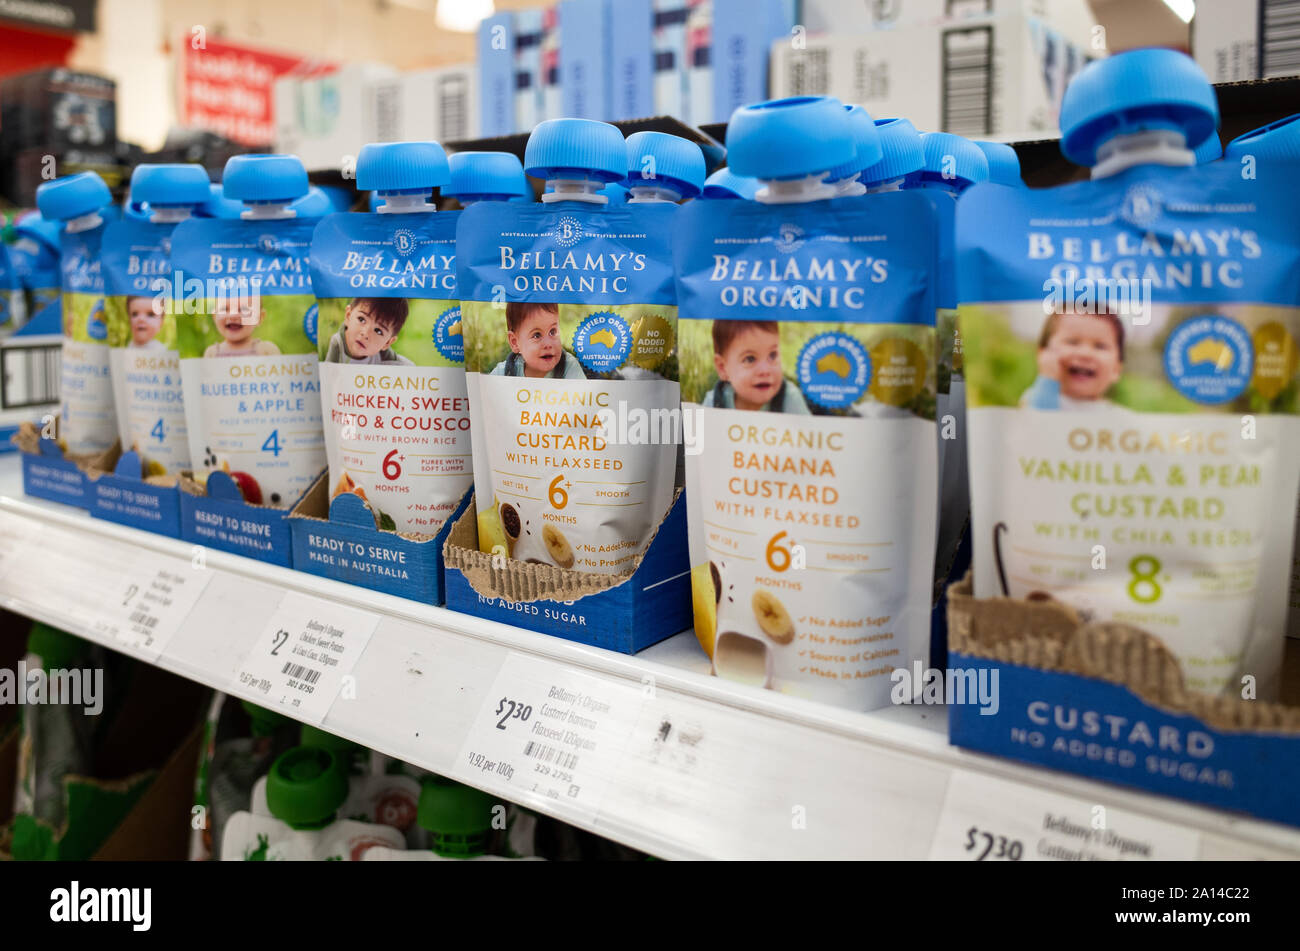 Bellamy's Organic baby food packages in different flavours on supermarket shelf. Stock Photo